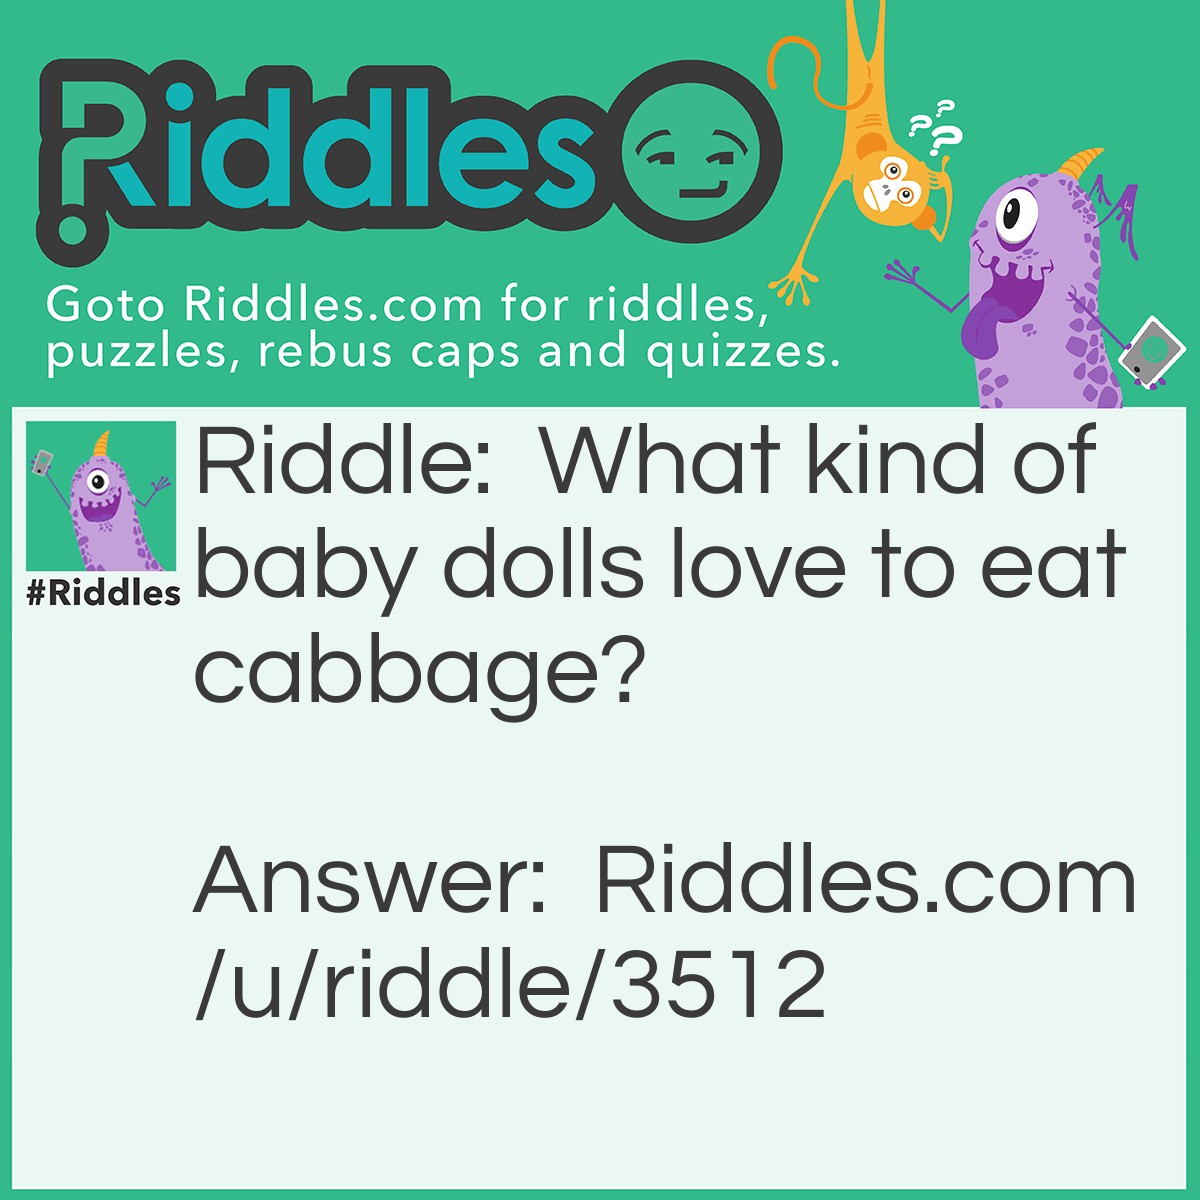 Riddle: What kind of baby dolls love to eat cabbage? Answer: Cabbage patch kids!